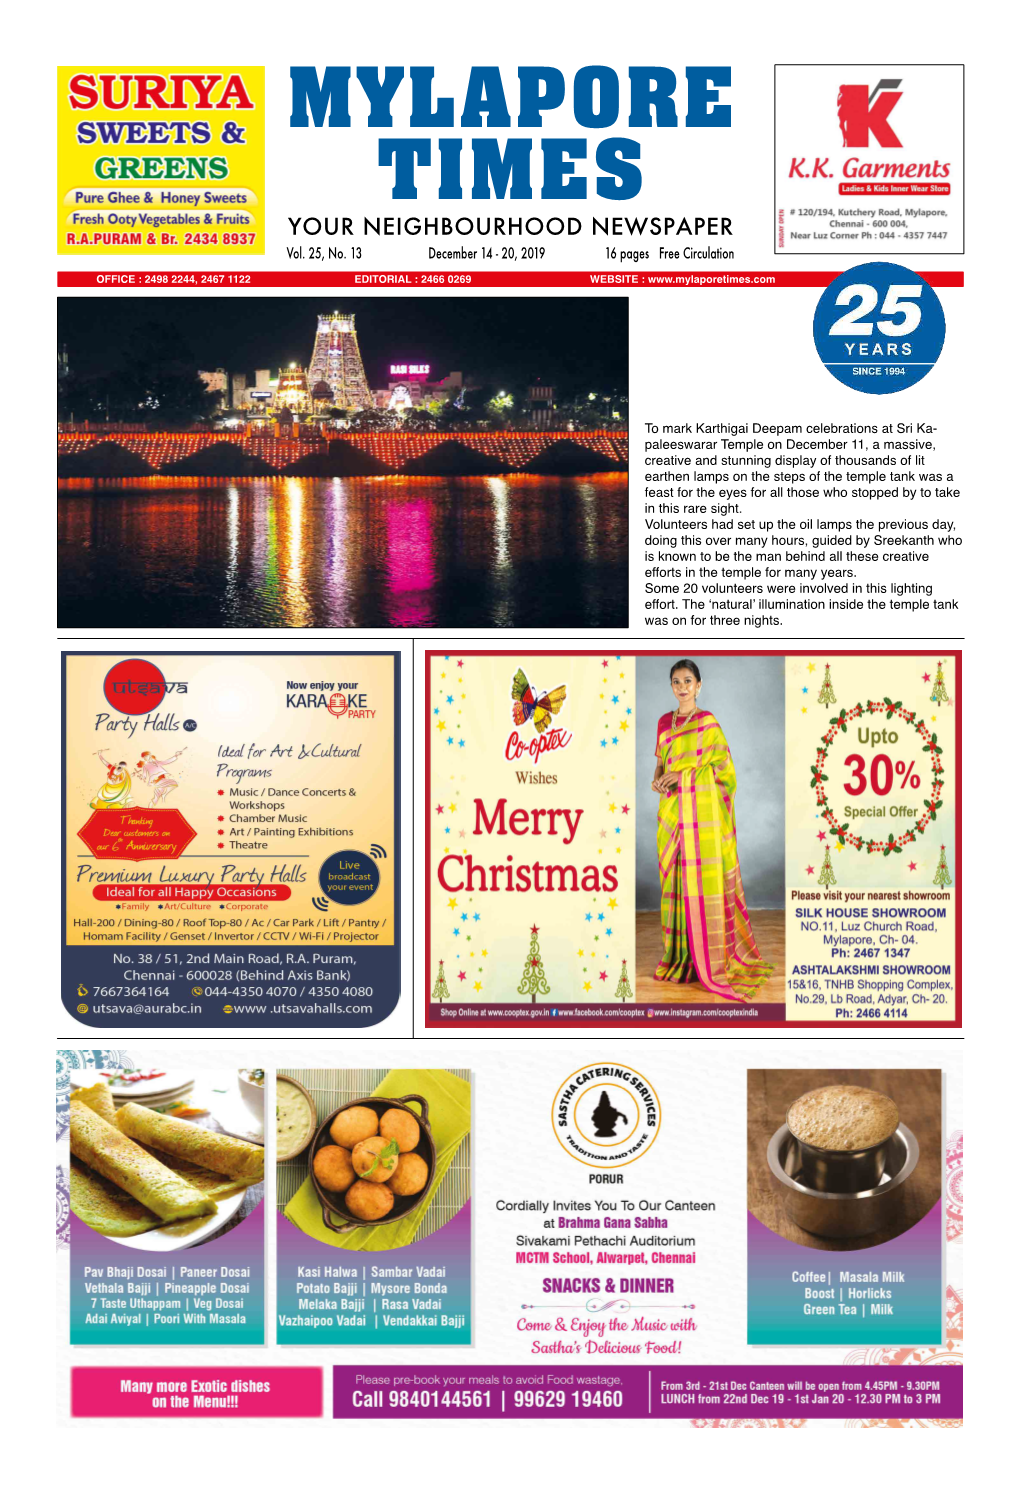 Mylapore Daily the Mylapore Times Web Site, Is Active 24 X 7